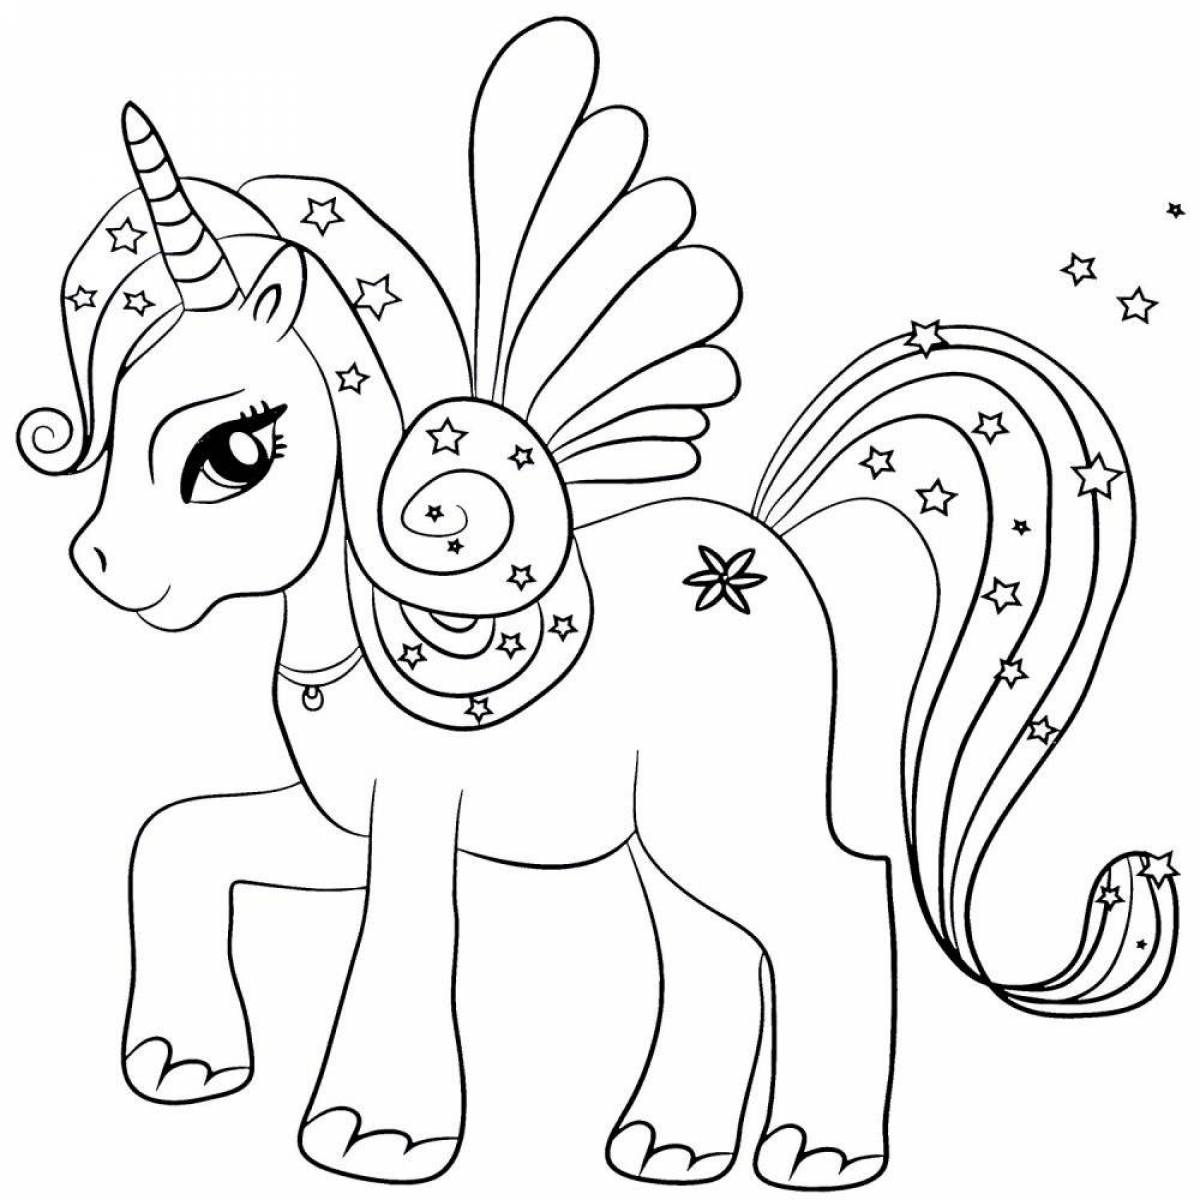 Amazing unicorn coloring book for kids 6-7 years old